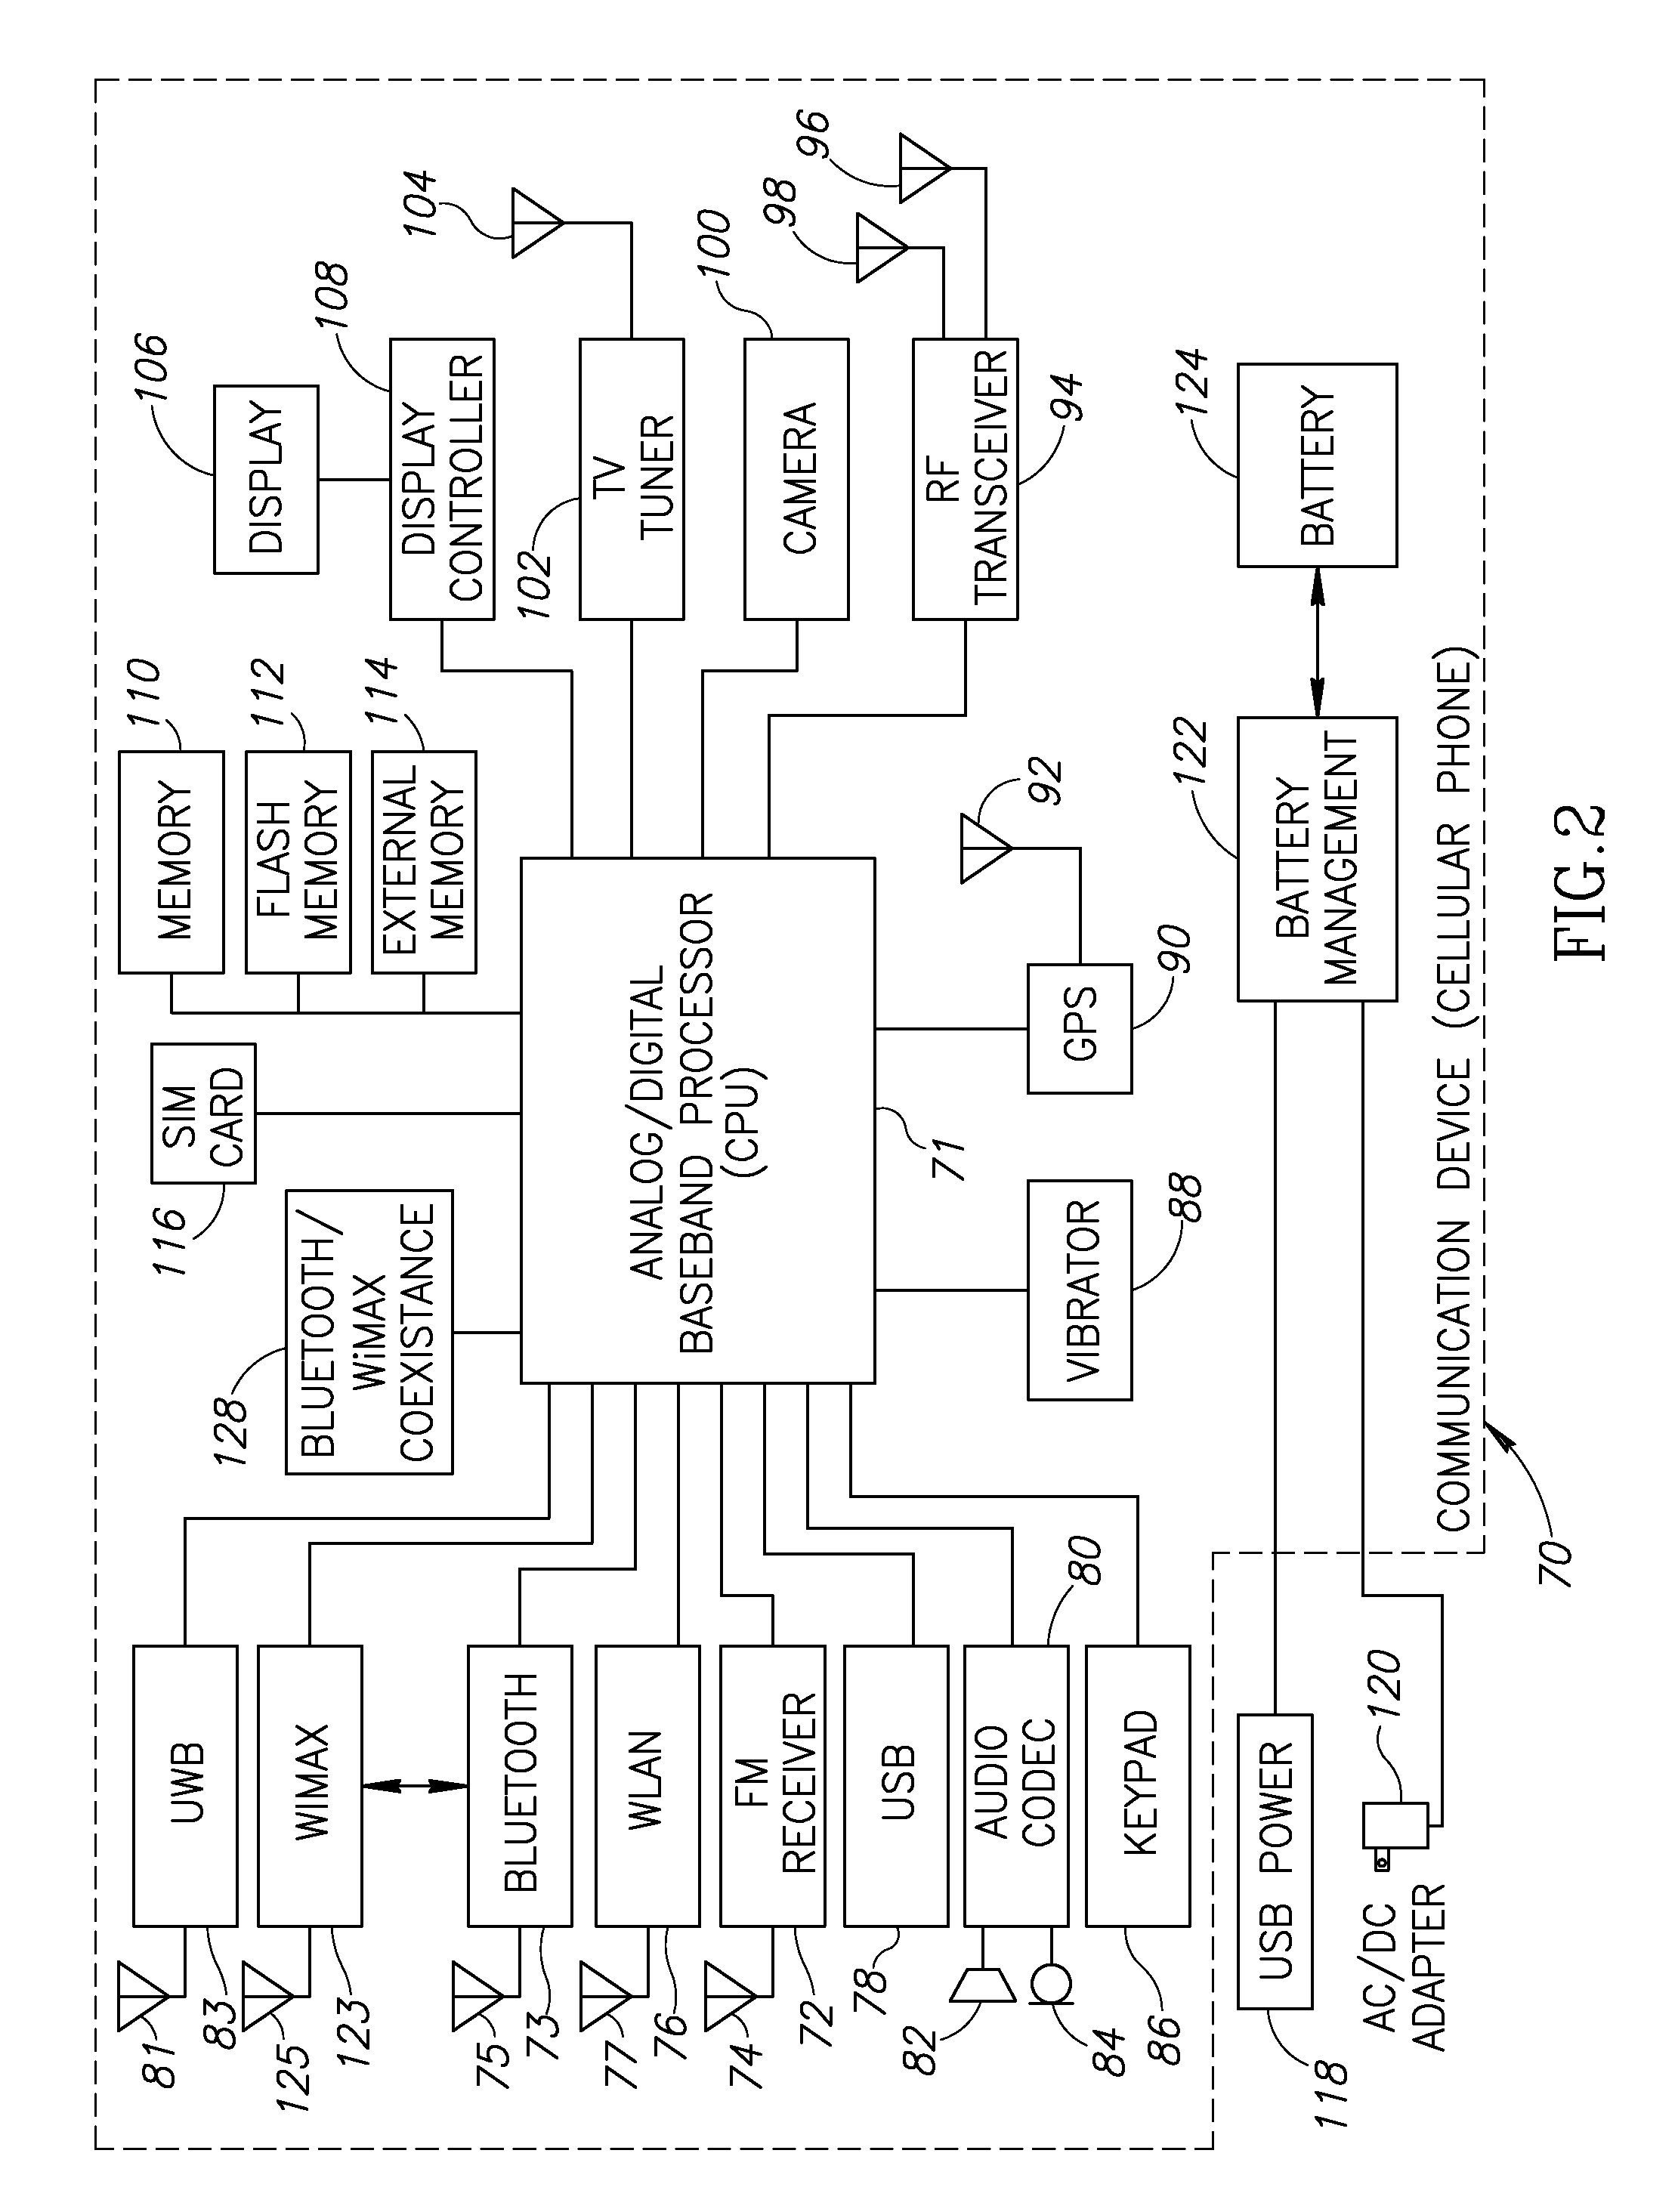 Apparatus for and method of bluetooth and wimax coexistence in a mobile handset